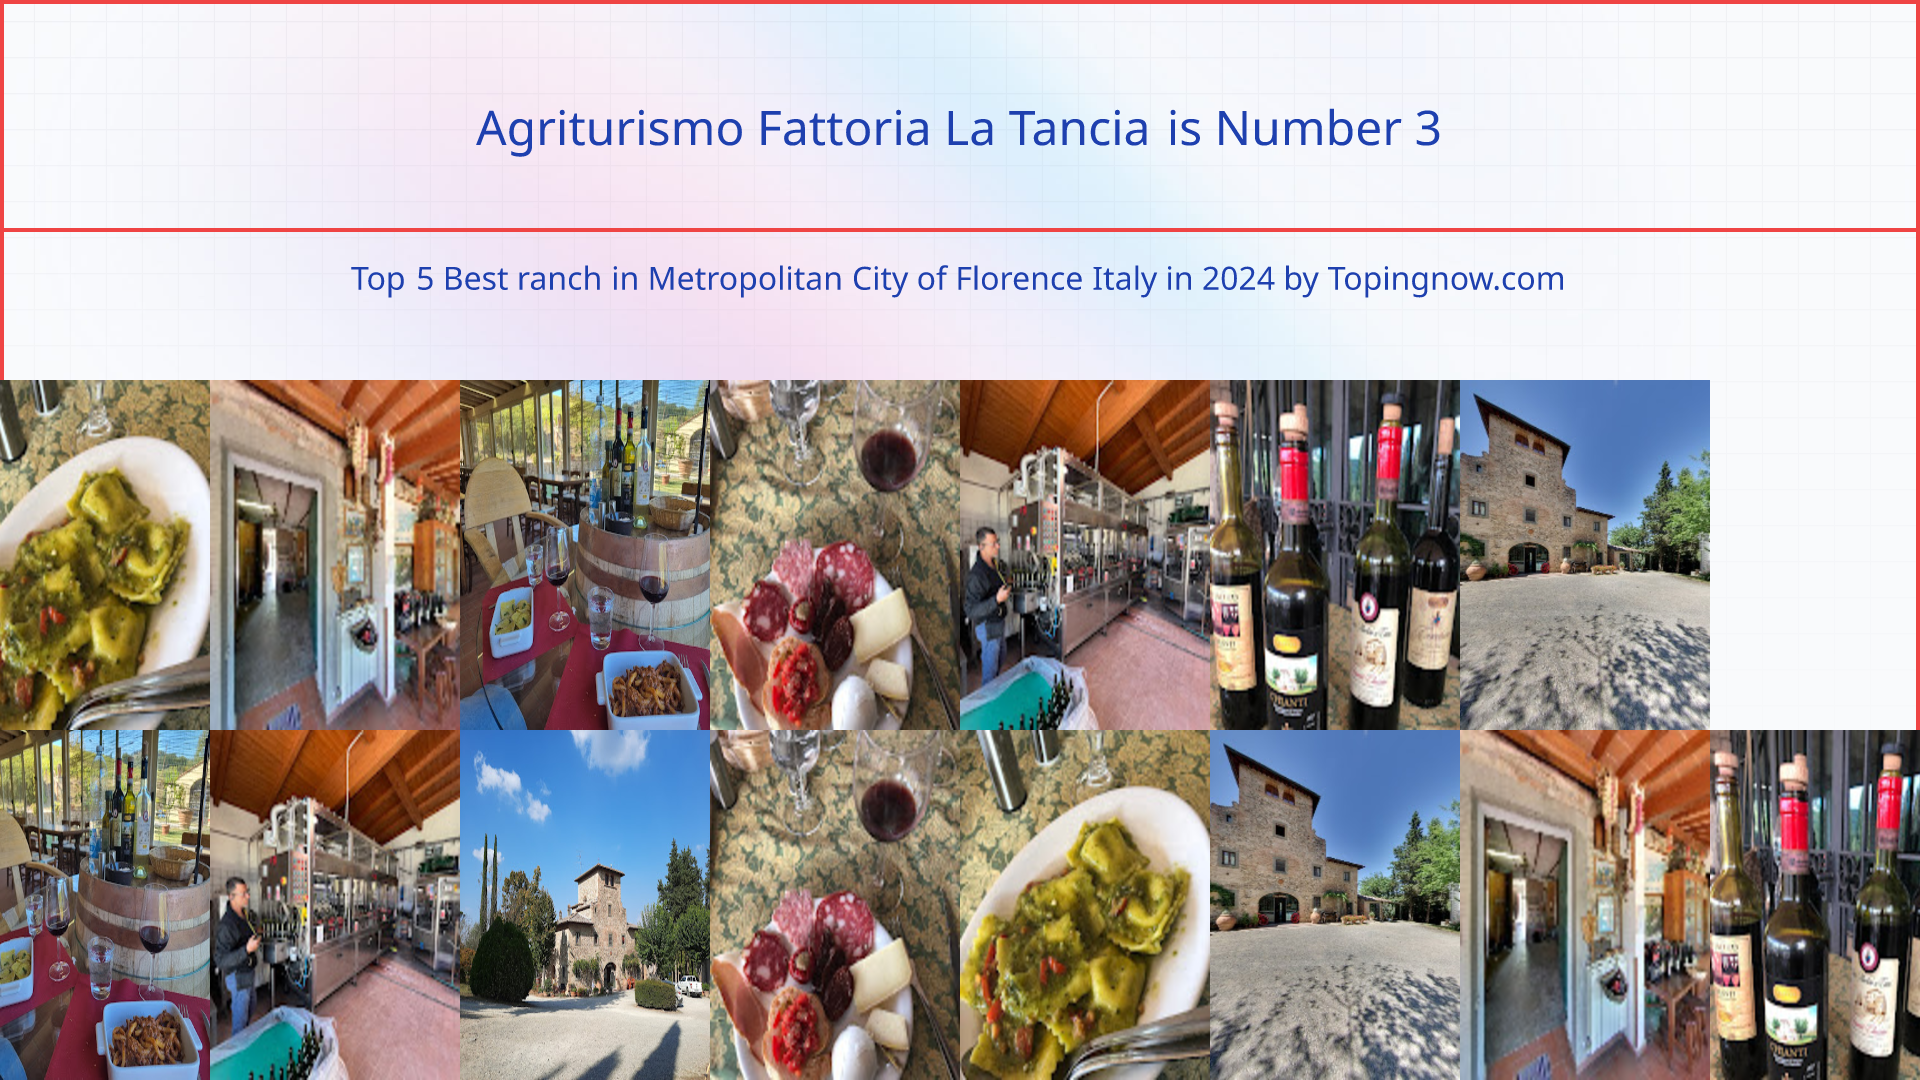 Agriturismo Fattoria La Tancia: Top 5 Best ranch in Metropolitan City of Florence Italy in 2024